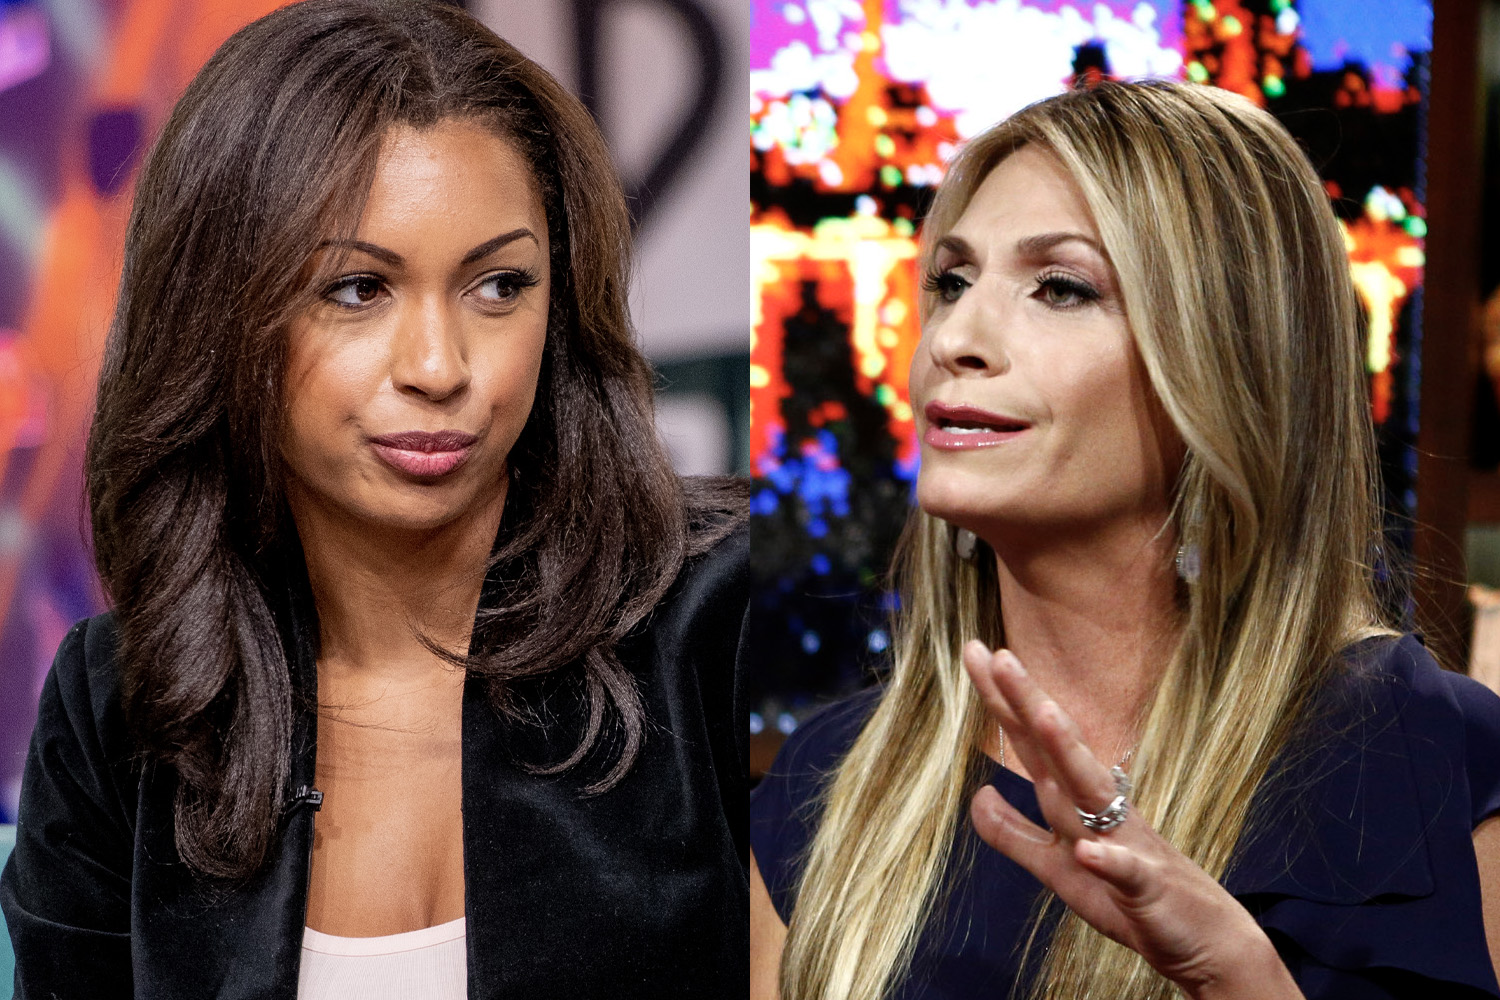 ‘RHONY’: Heather Thomson Says Eboni K. Williams ‘Stirred the Pot’ Which Led to Feud With Leah McSweeney